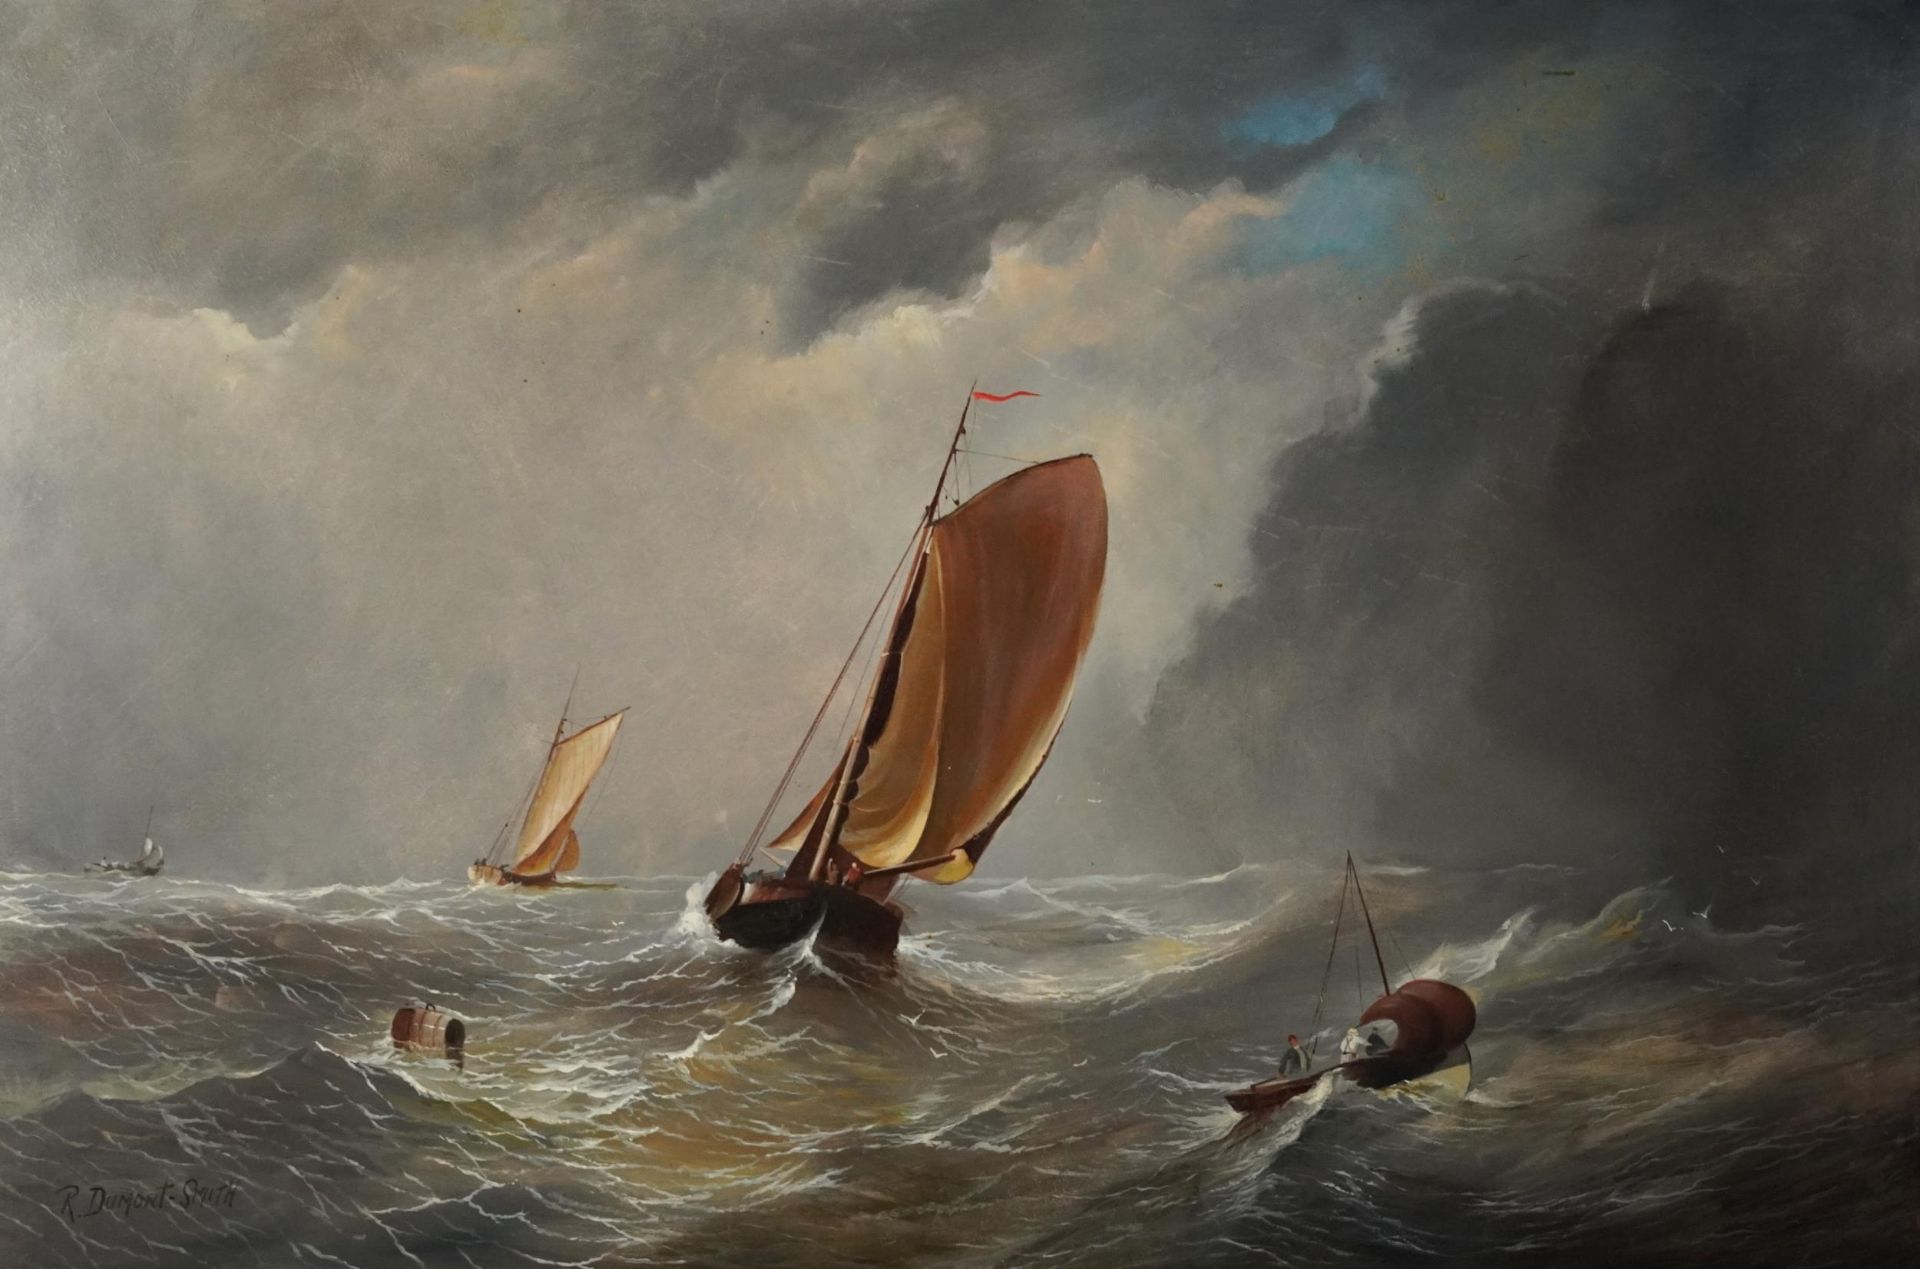 Robert Dumont Smith - Boats at sea with figures, maritime interest oil on board housed in an